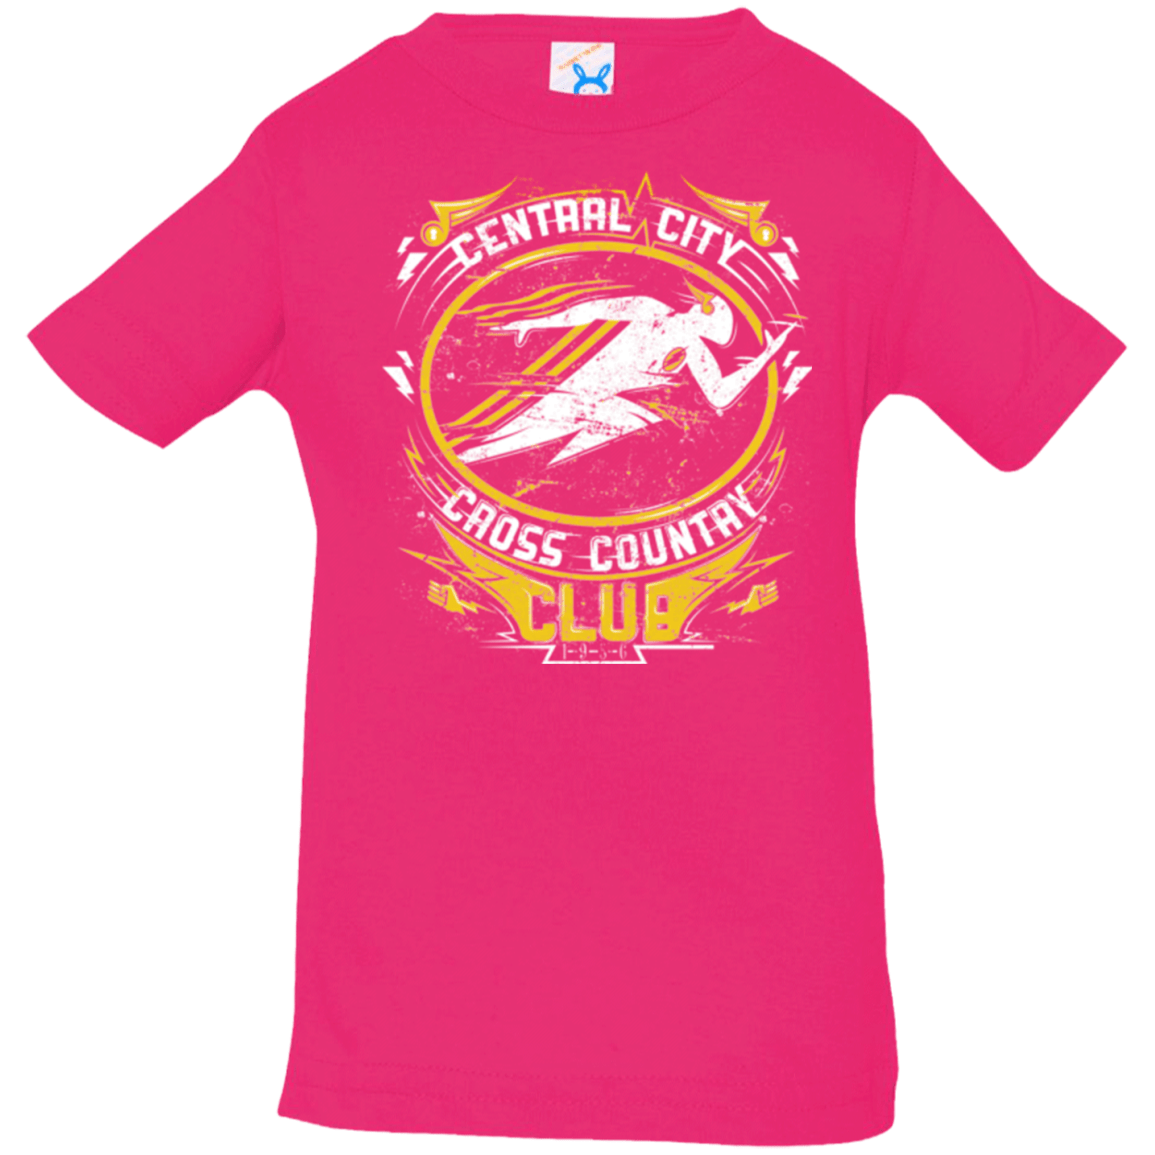 T-Shirts Hot Pink / 6 Months Cross Country Club Infant Premium T-Shirt